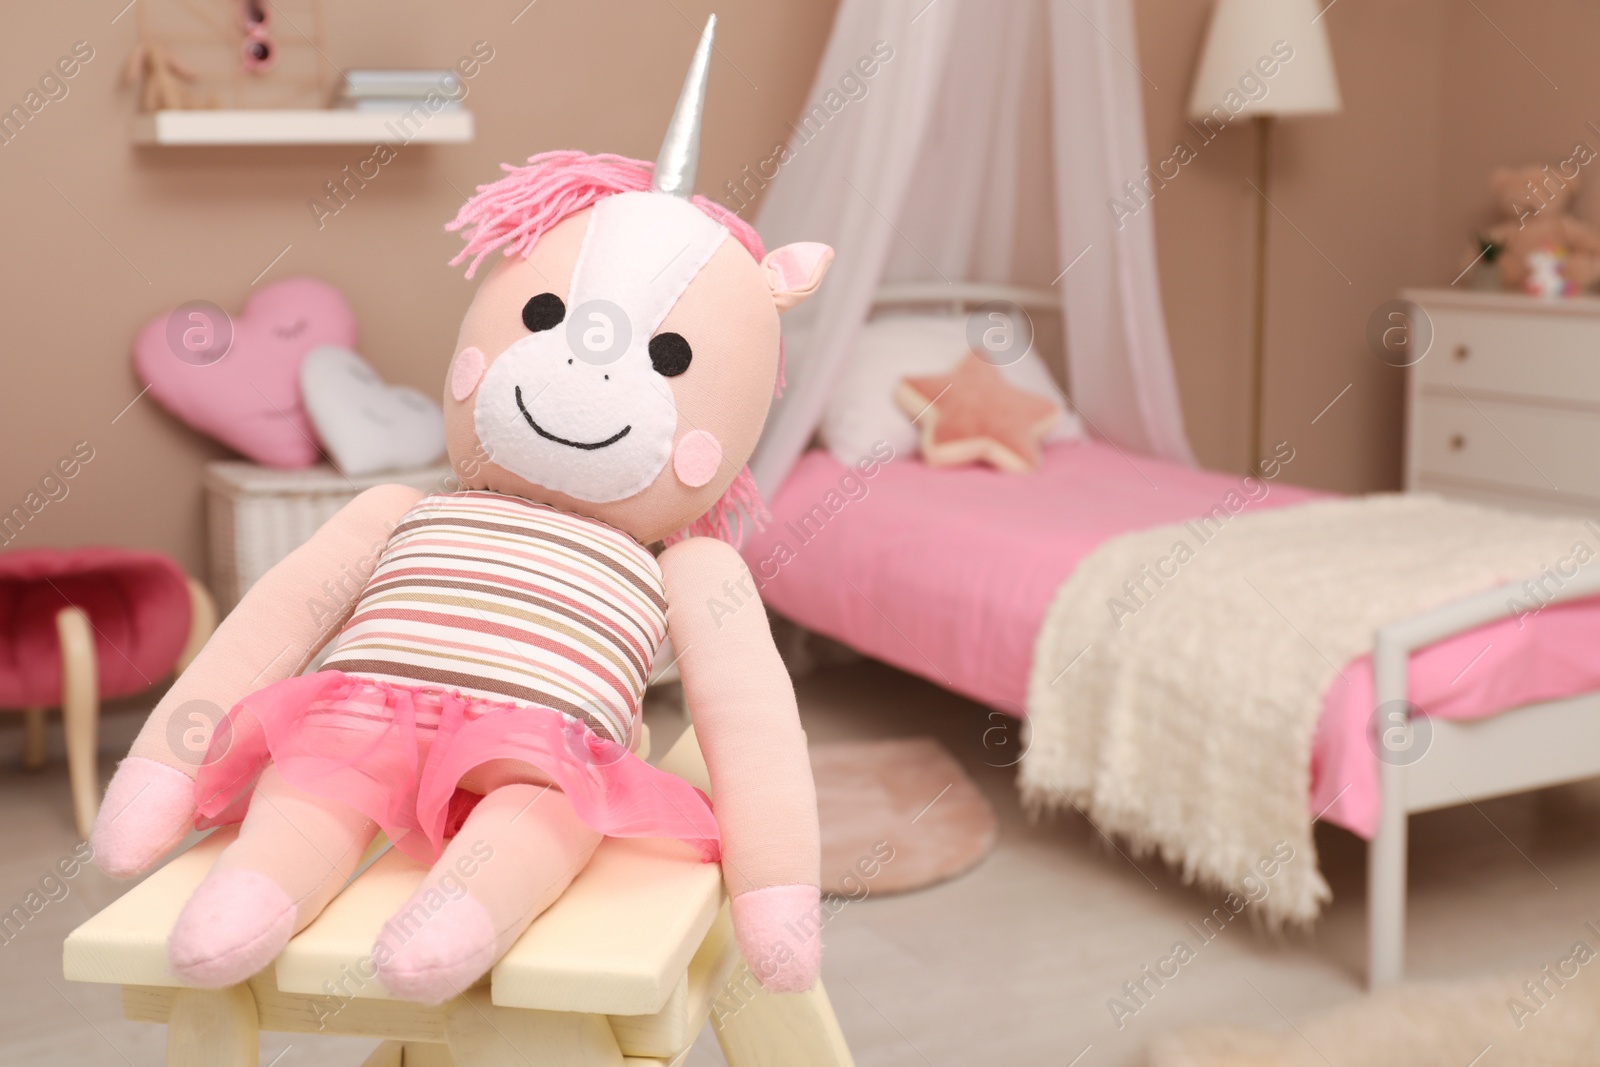 Photo of Soft toy unicorn on wooden stool in child's room, space for text. Interior design